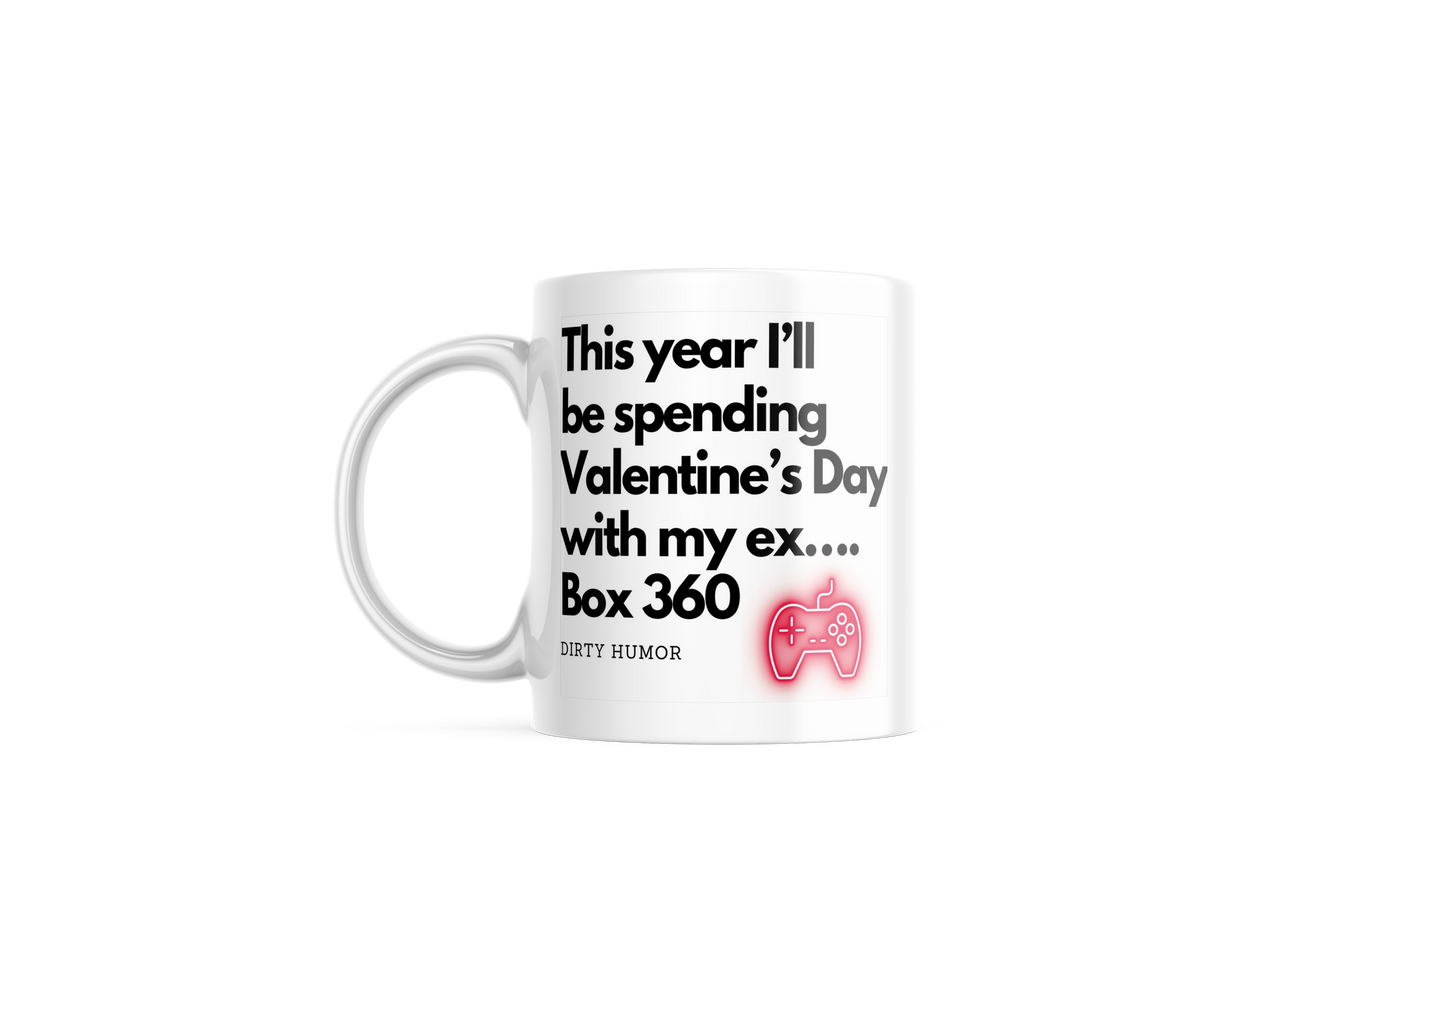 This year I’ll be spending Valentine’s Day with my ex…. Box 360